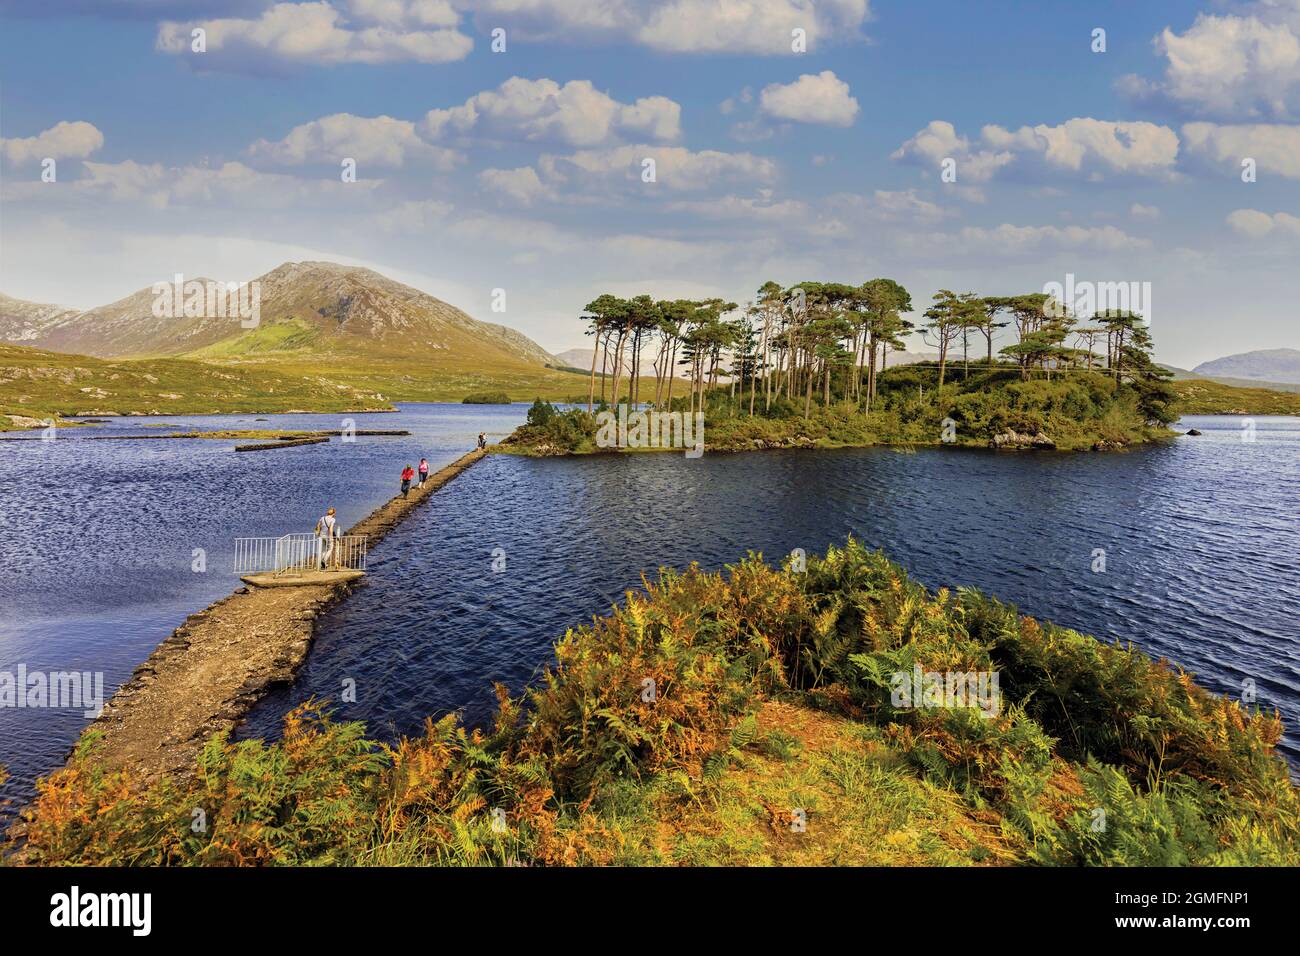 Visitors on causeway to Pines Island in Derryclare Lough, Connemara, County Galway, Republic of Ireland. Eire. Stock Photo